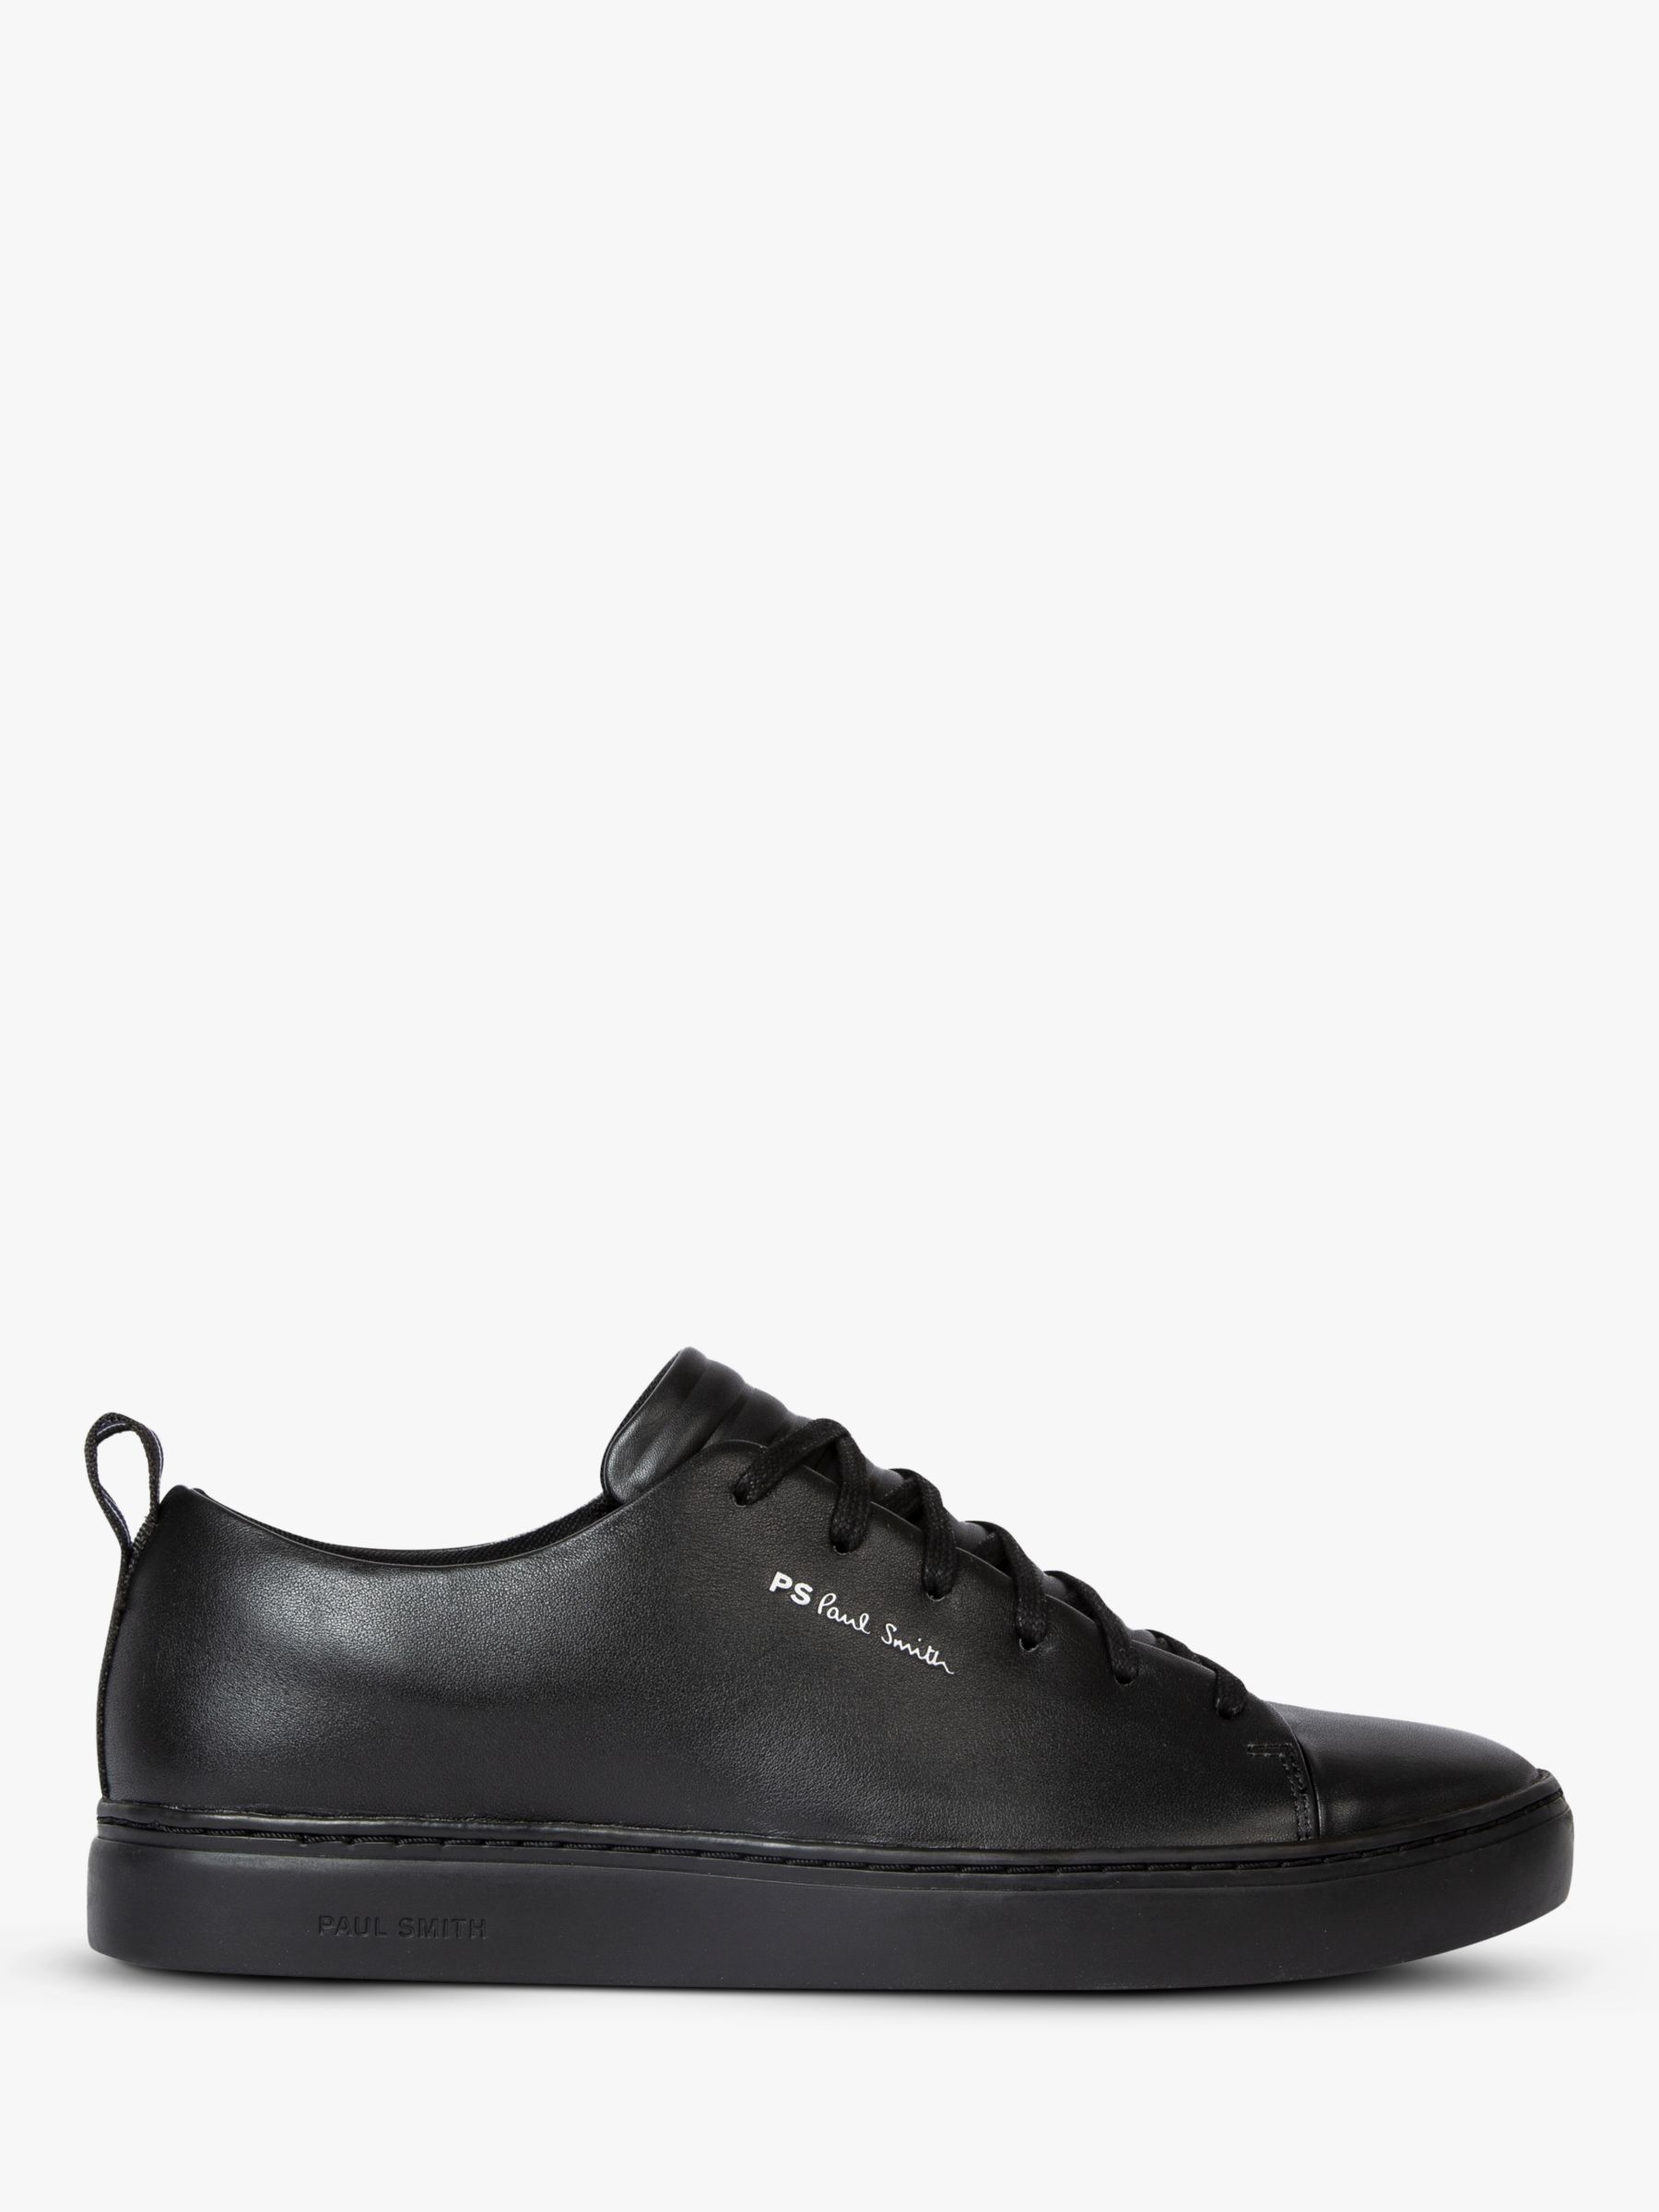 PS Paul Smith Lee Leather Trainers, Black at John Lewis & Partners